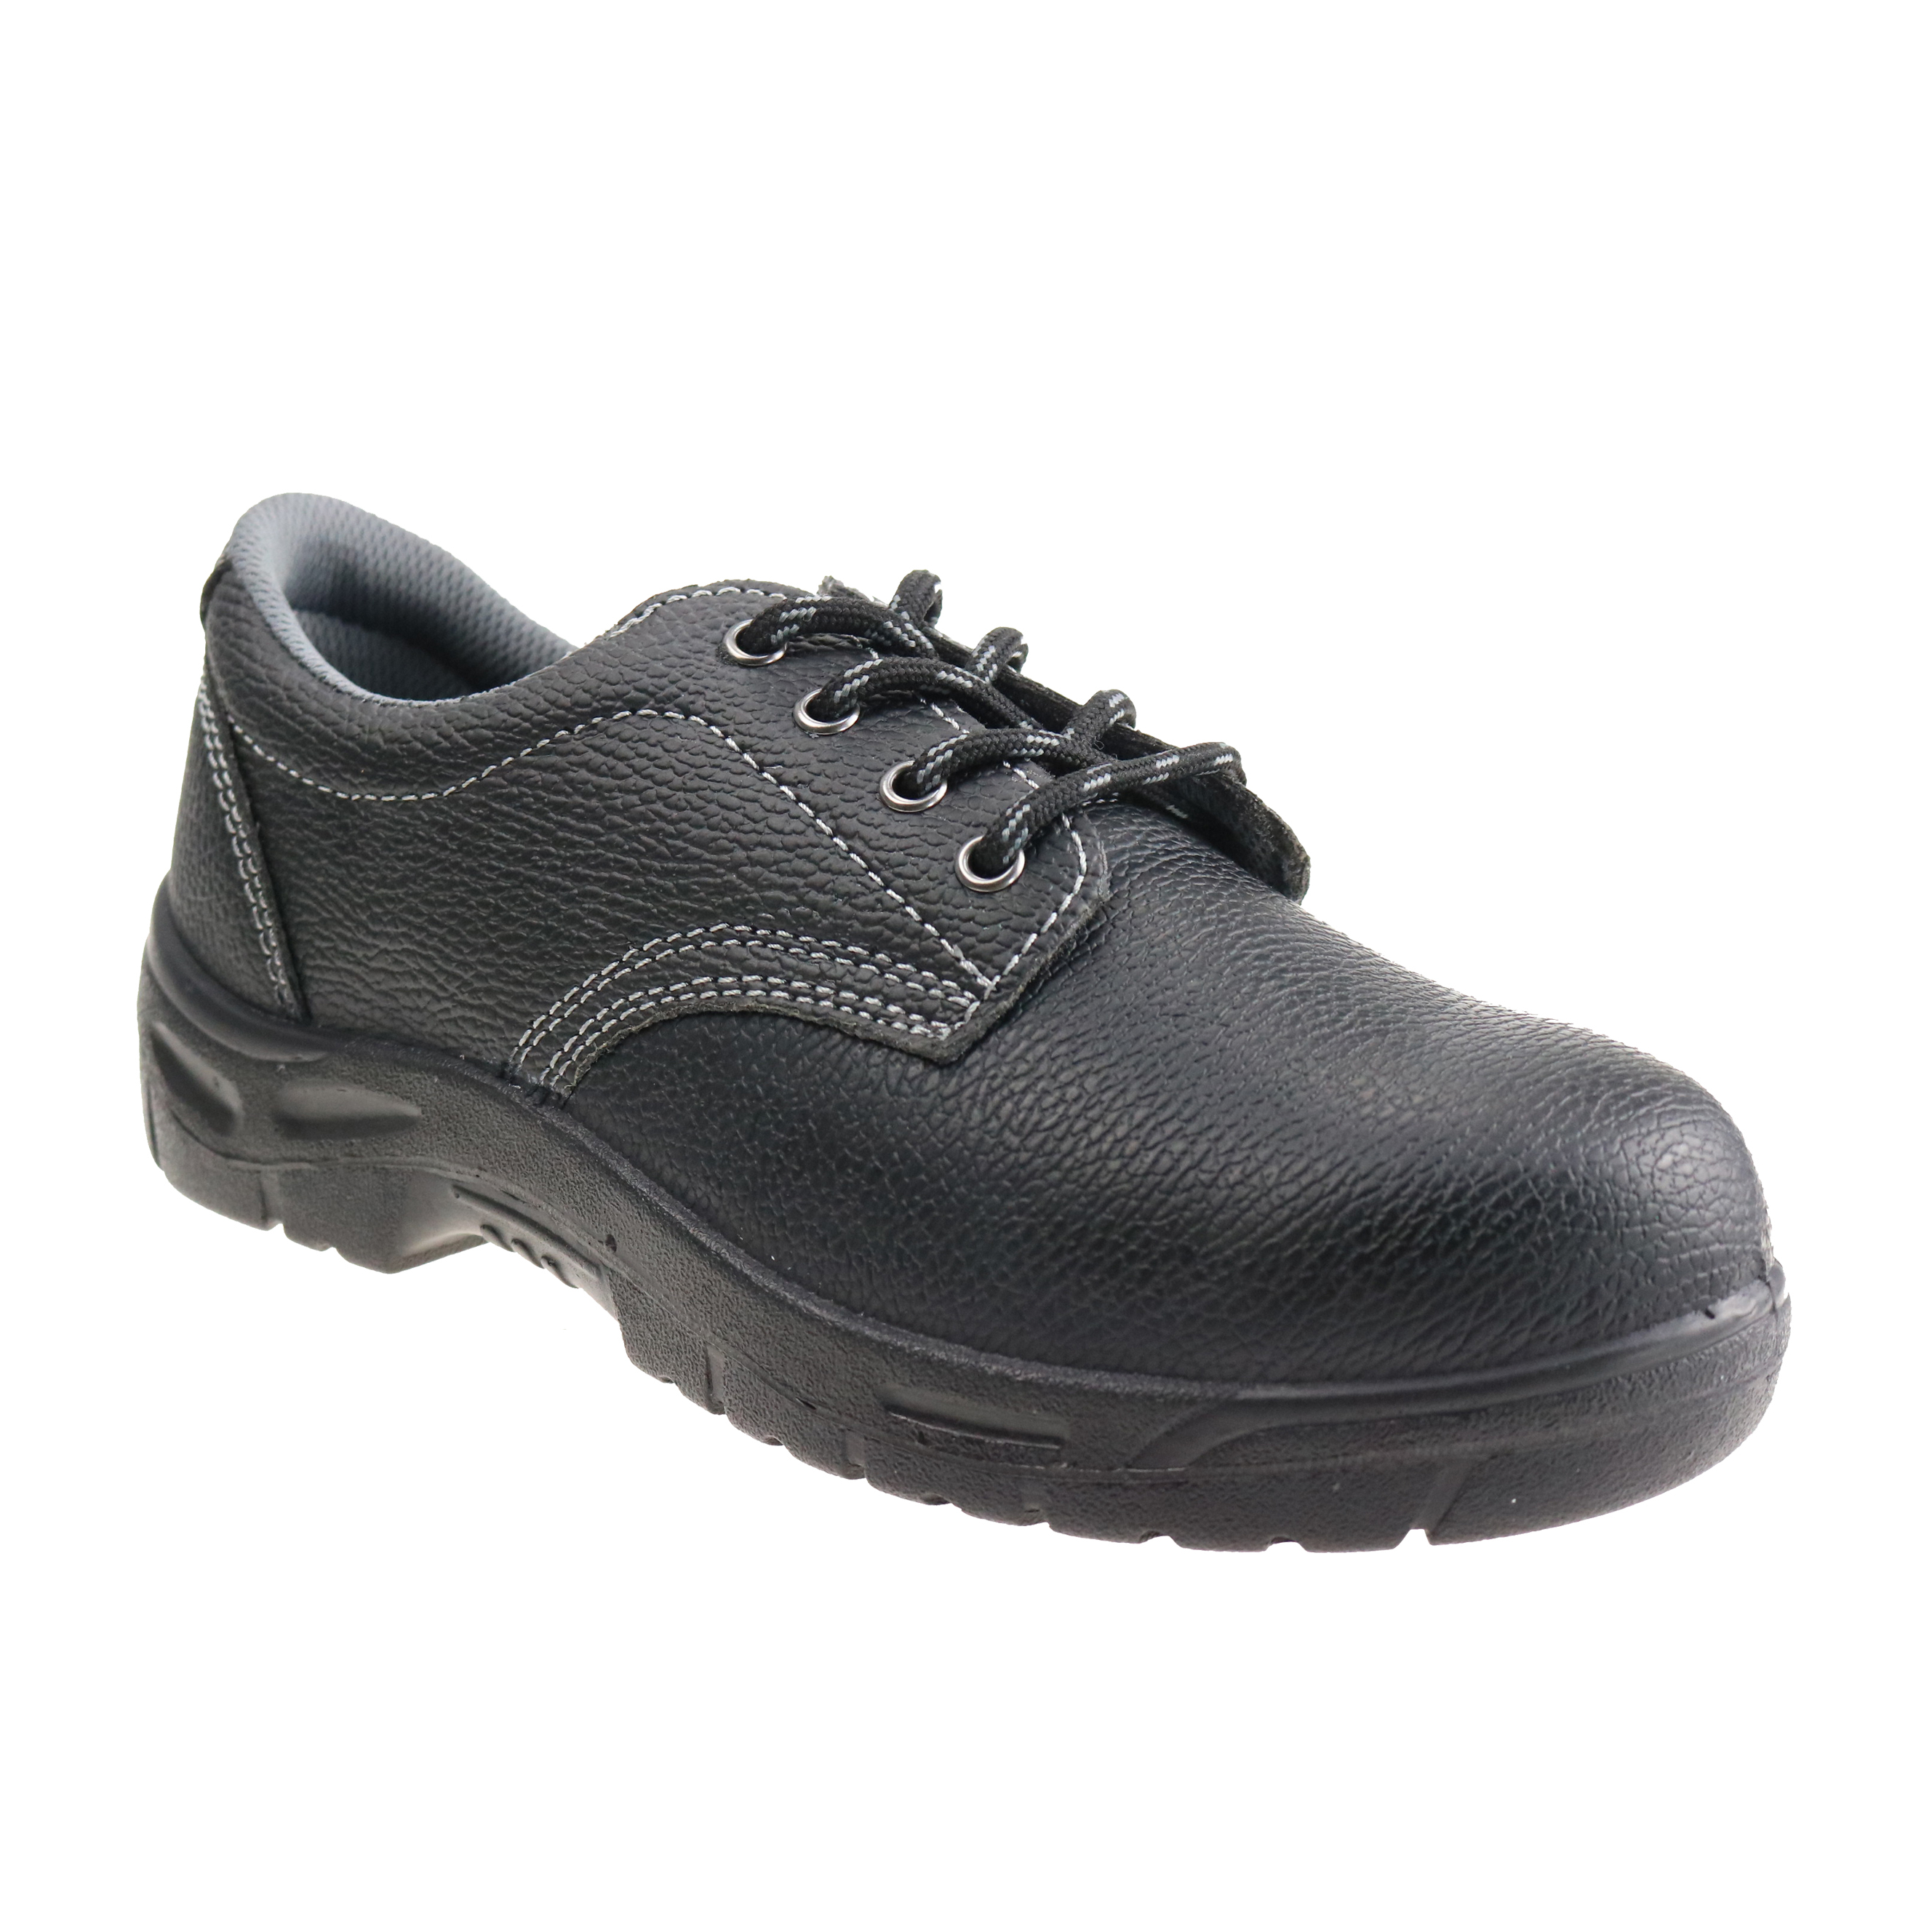 Black safety shoes with steel toe ,anti static construction water proof safety shoes